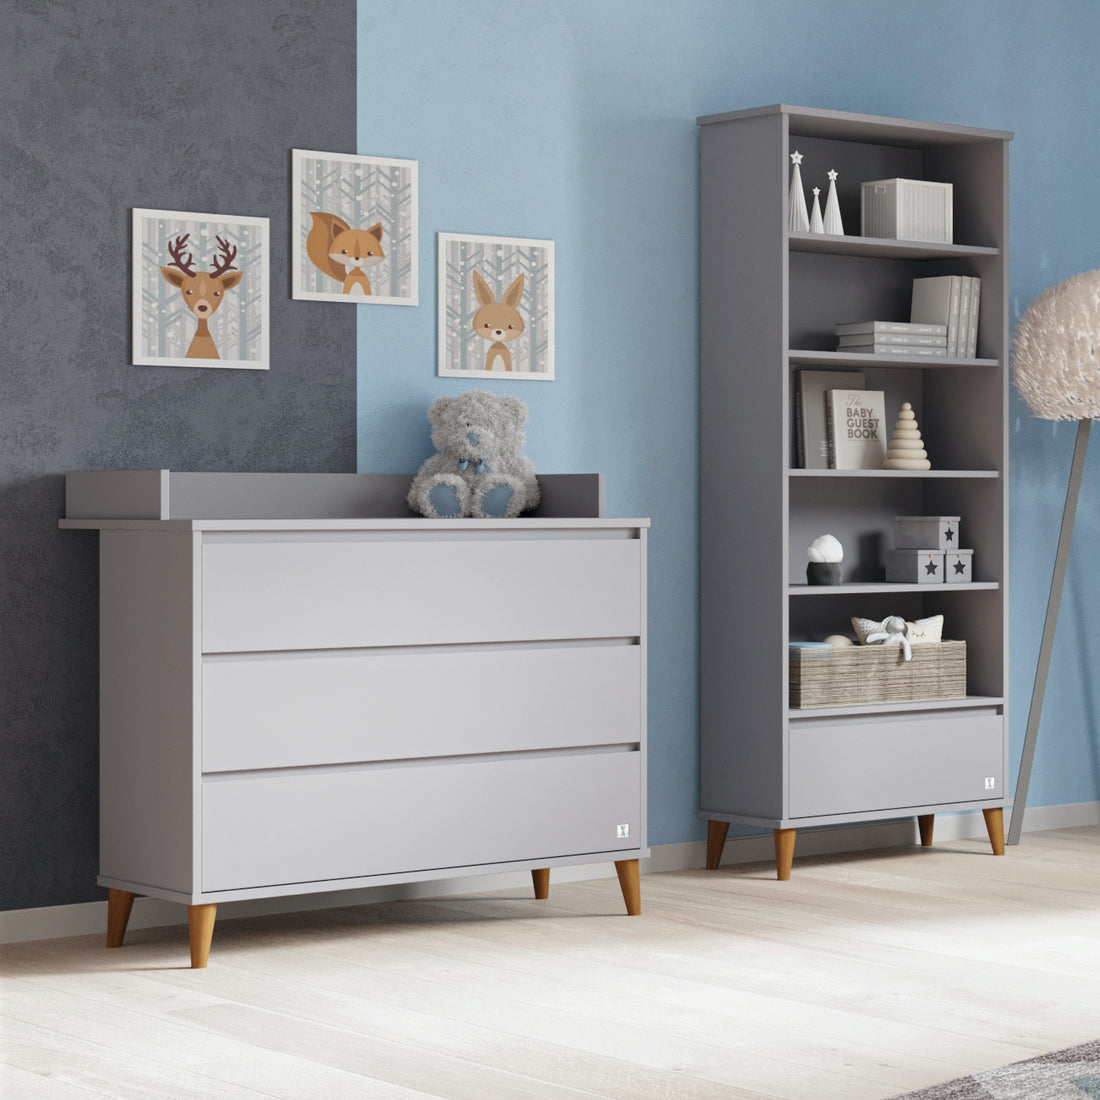 Bookcase NORDIC with drawer in grey | Bookcase for children room | Exclusive children furniture | Bookcase Scandinavian design | Bookcase baby room | Nursery furniture